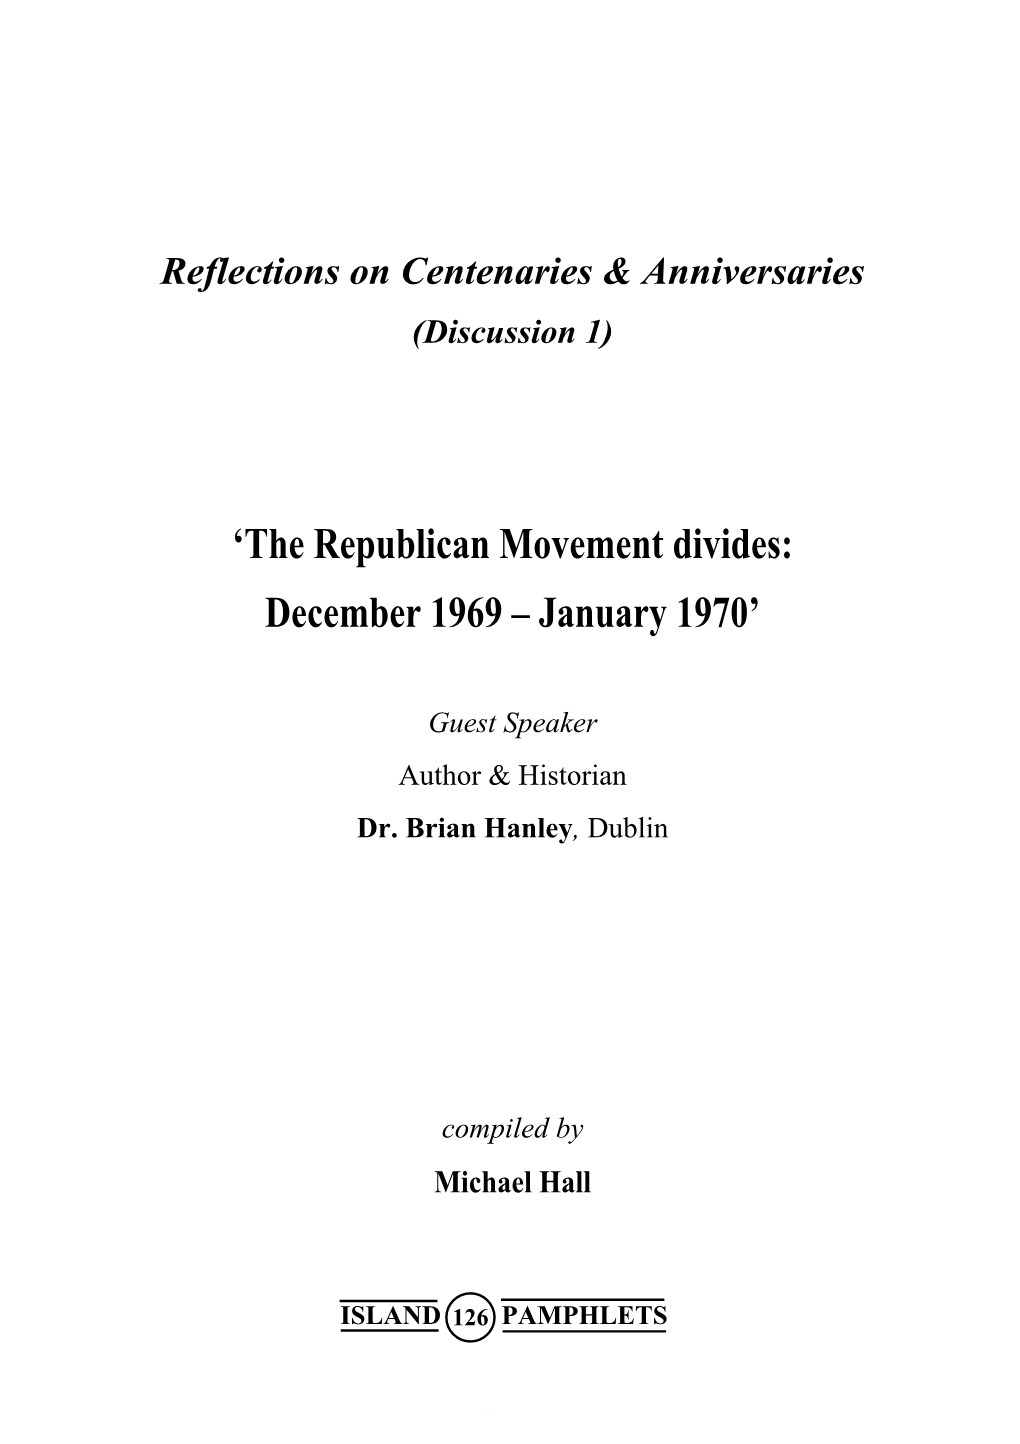 'The Republican Movement Divides: December 1969 – January 1970'